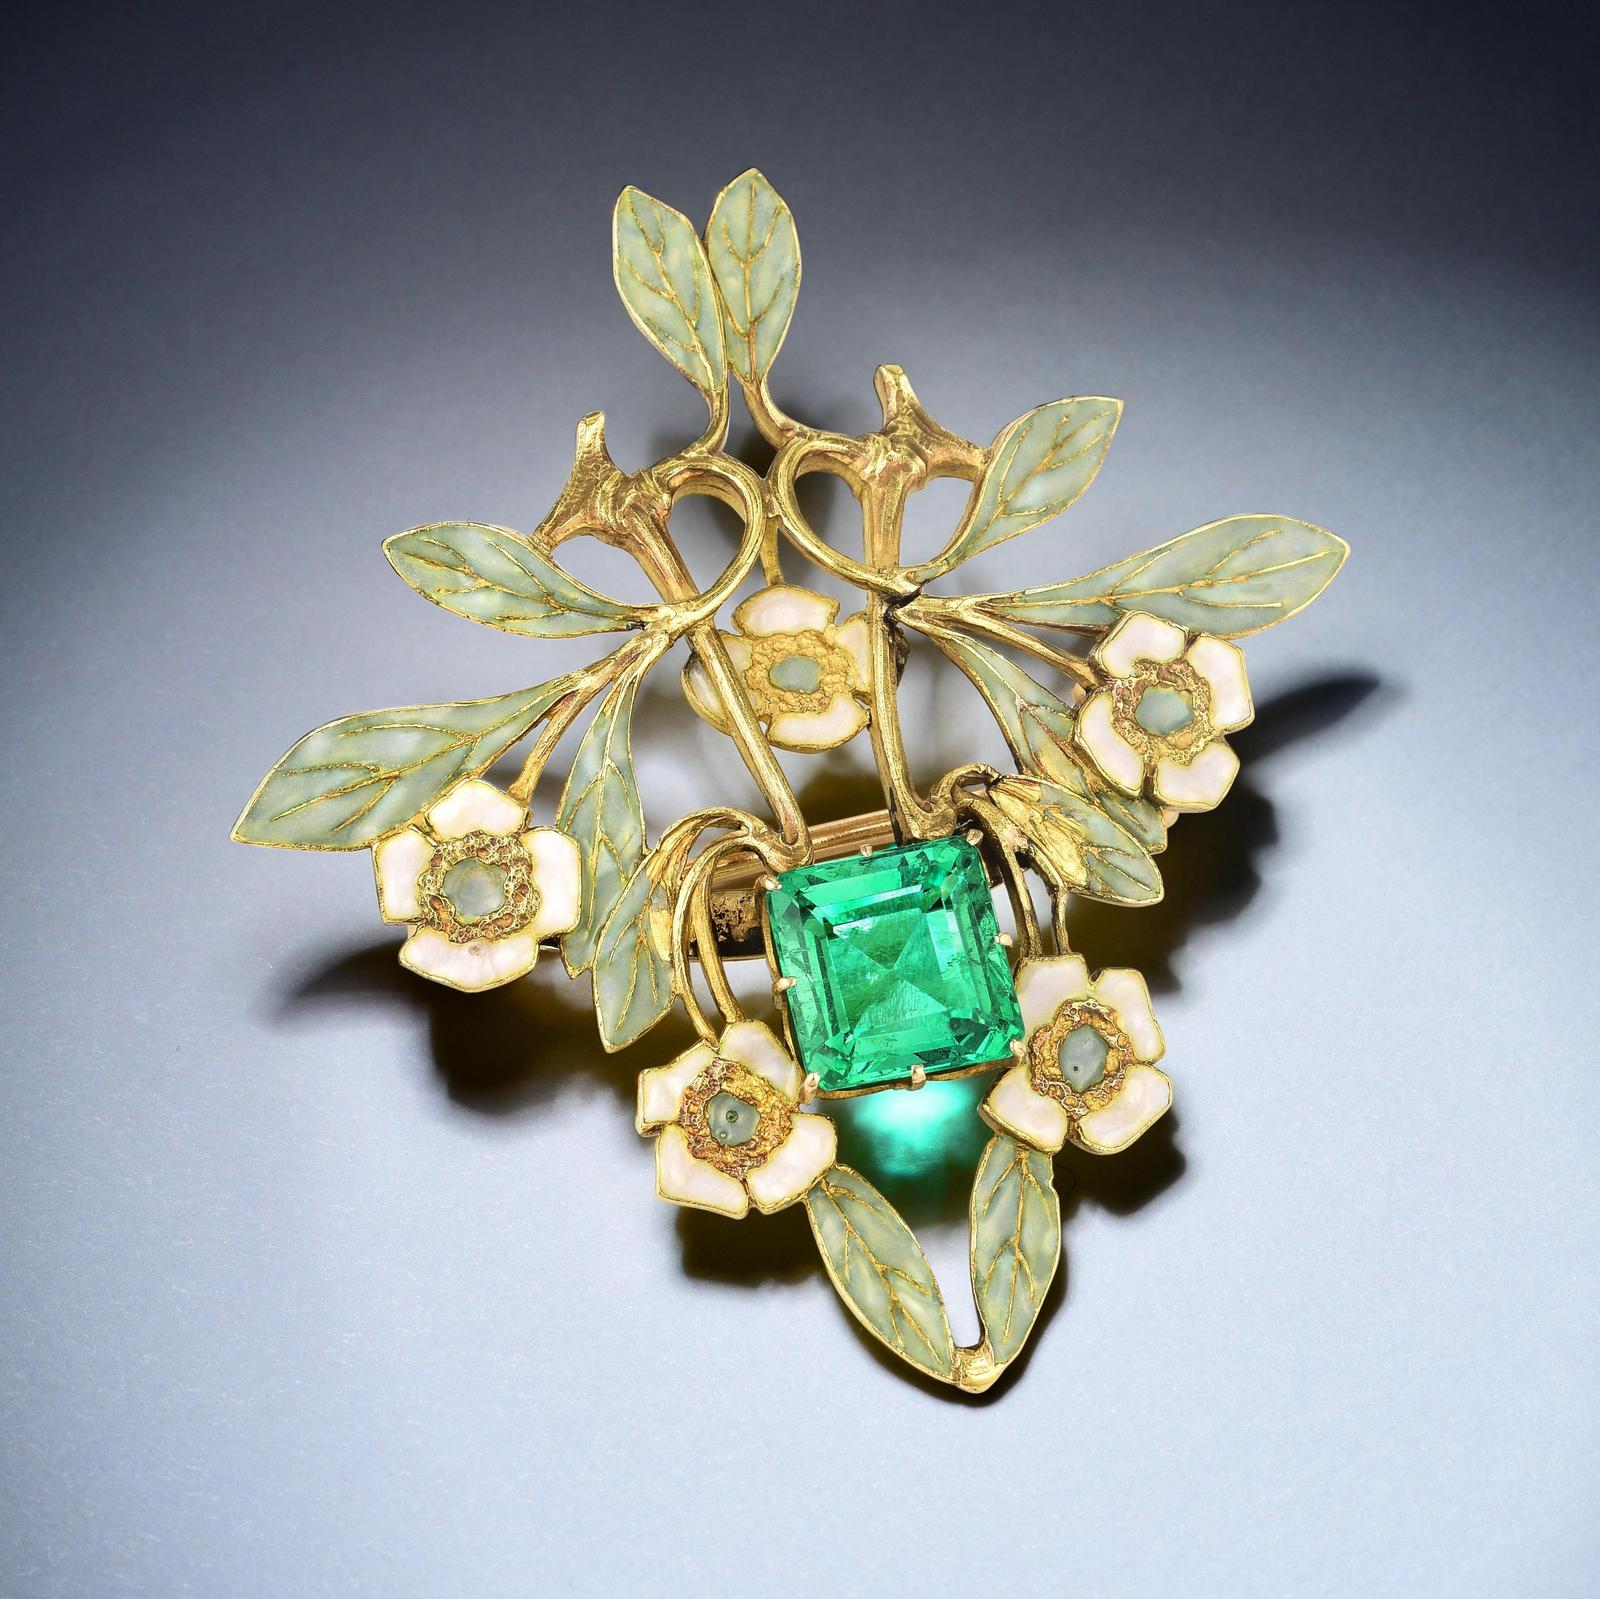 matchmaker morgenmad vene Art Nouveau Rene Lalique Emerald Pin | Fortuna Fine Jewelry Auctions and  Appraisers